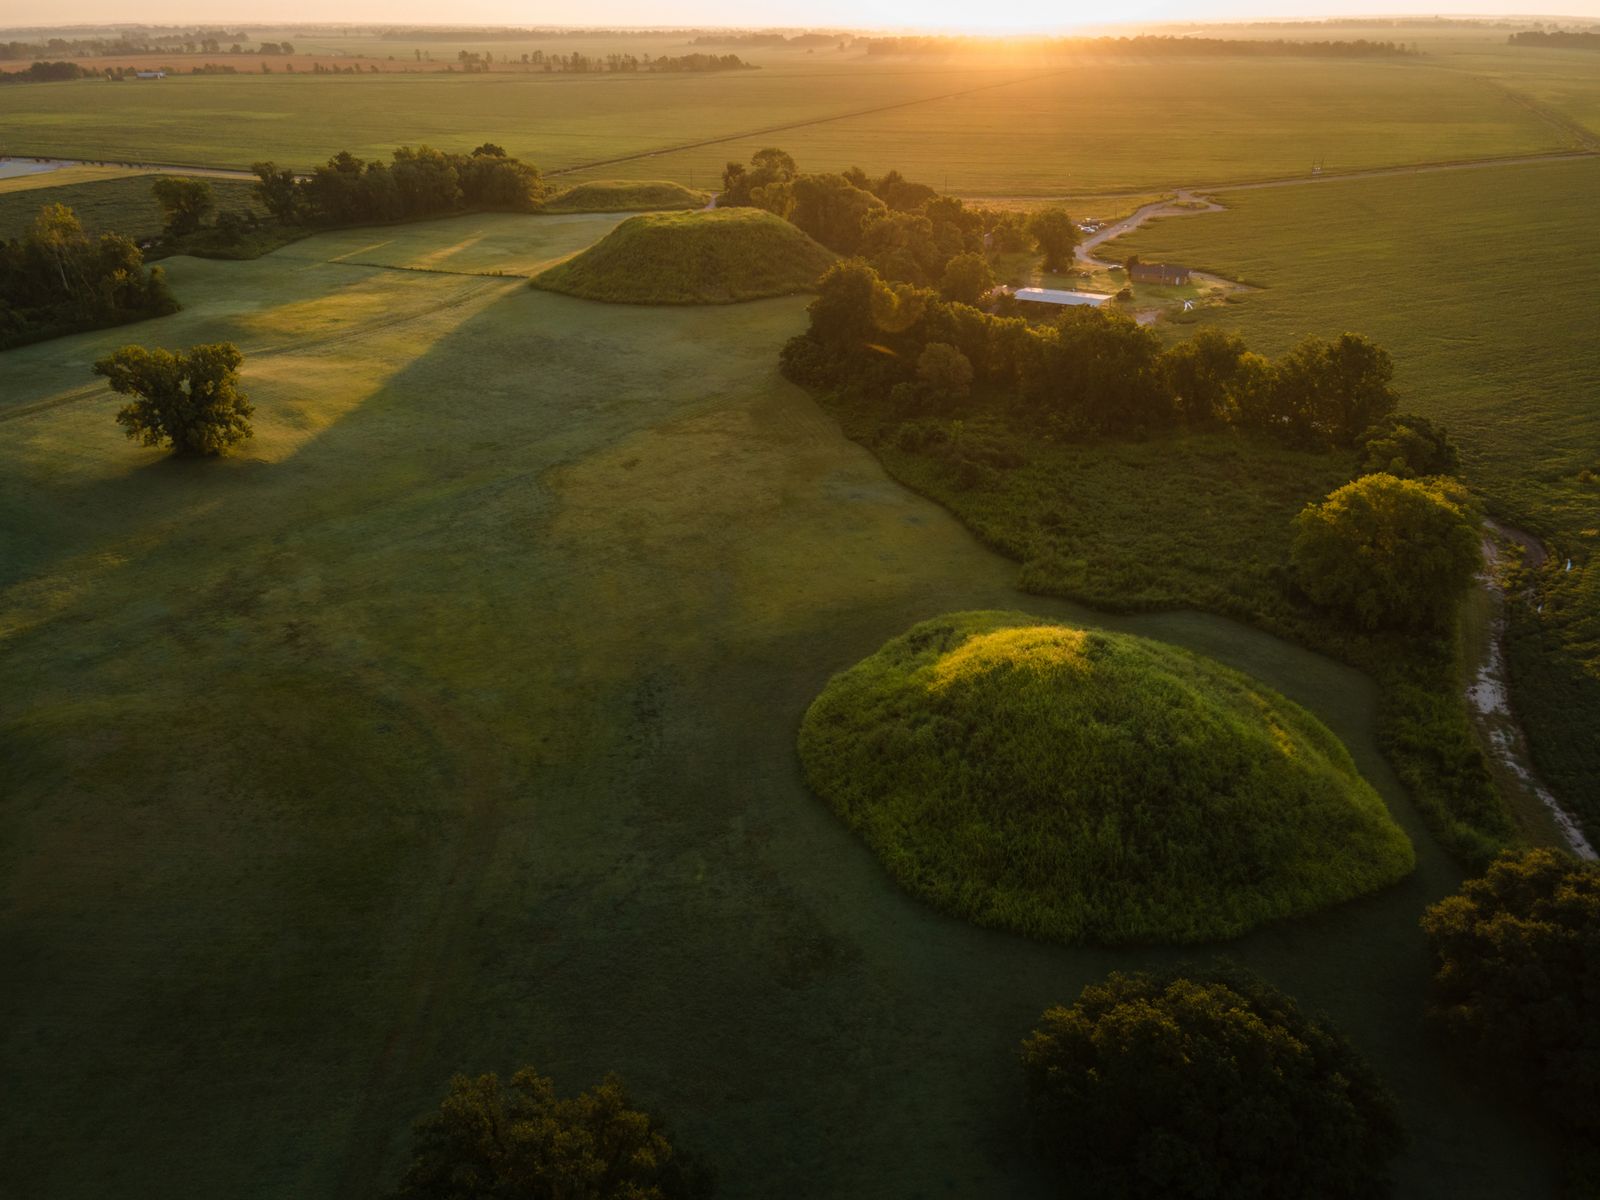 © Rory Doyle - First light casts on Native American mounds at the Winterville Mounds site in Winterville, Mississippi, USA.